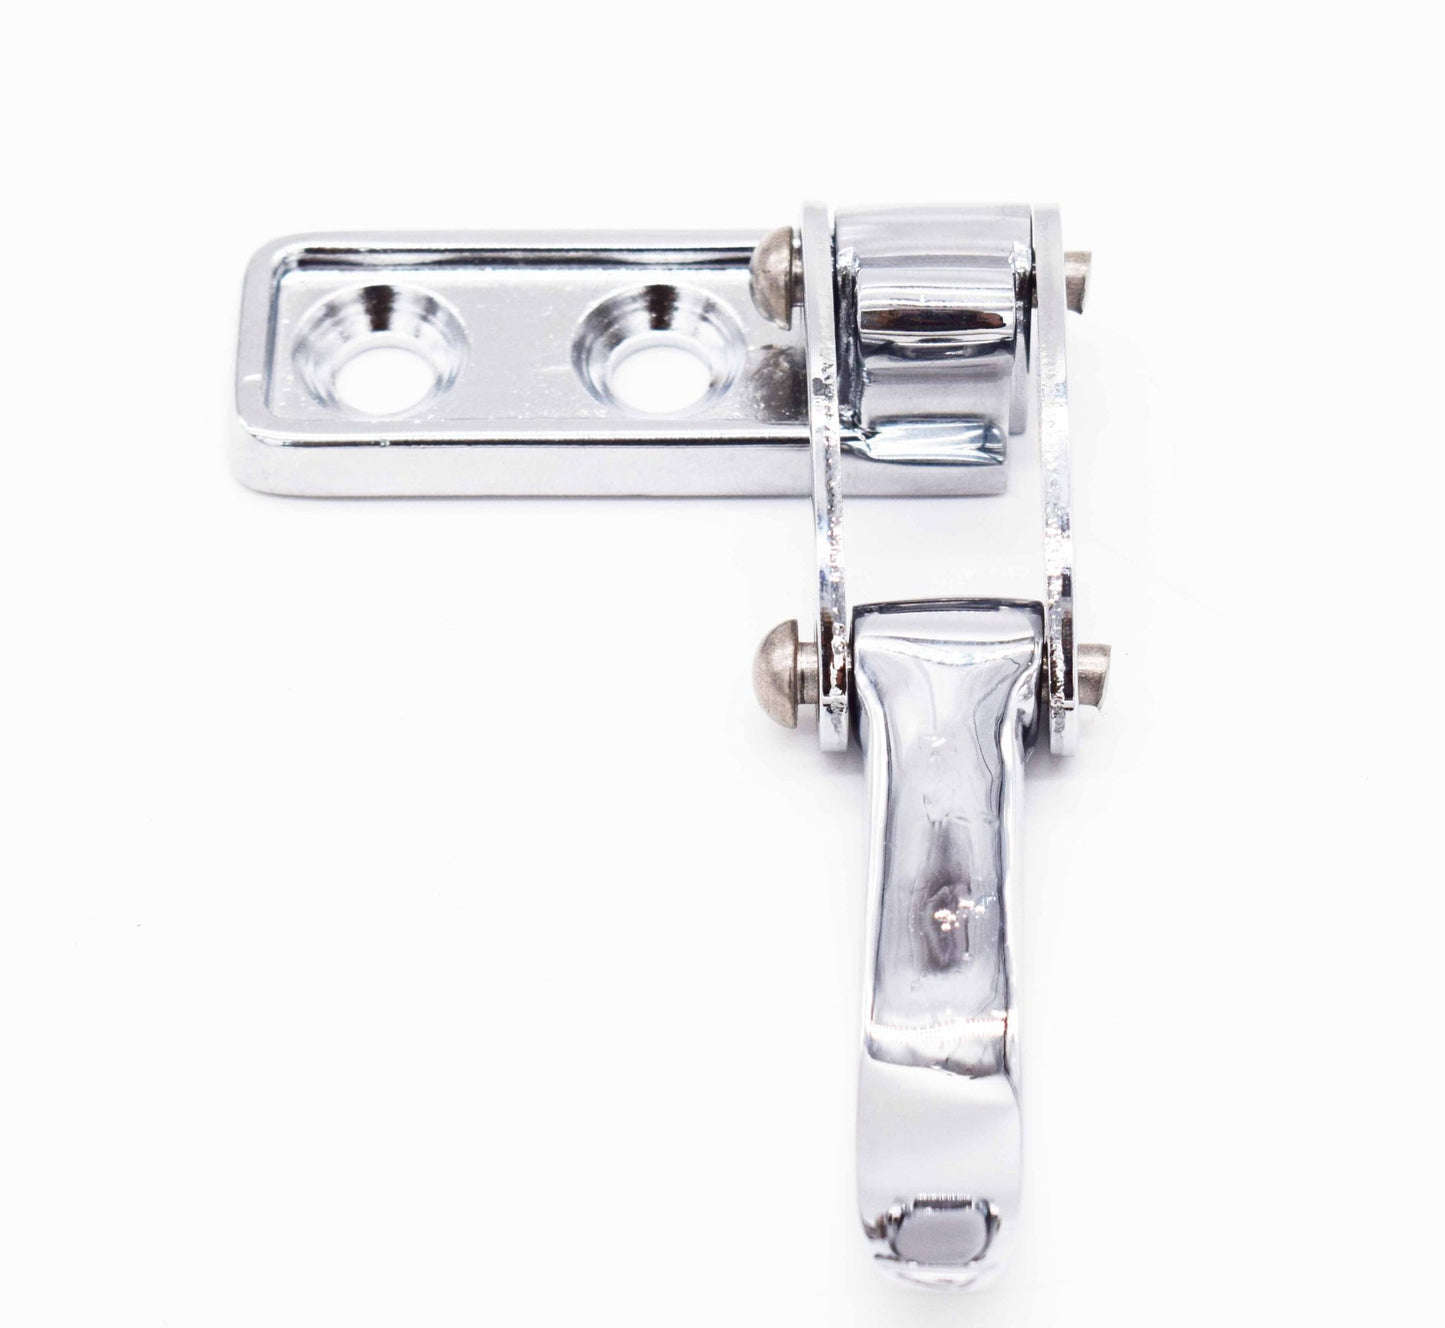 Convertible Lock Handle and Bracket, Passenger side, 1948-1951, Jeepster - The JeepsterMan